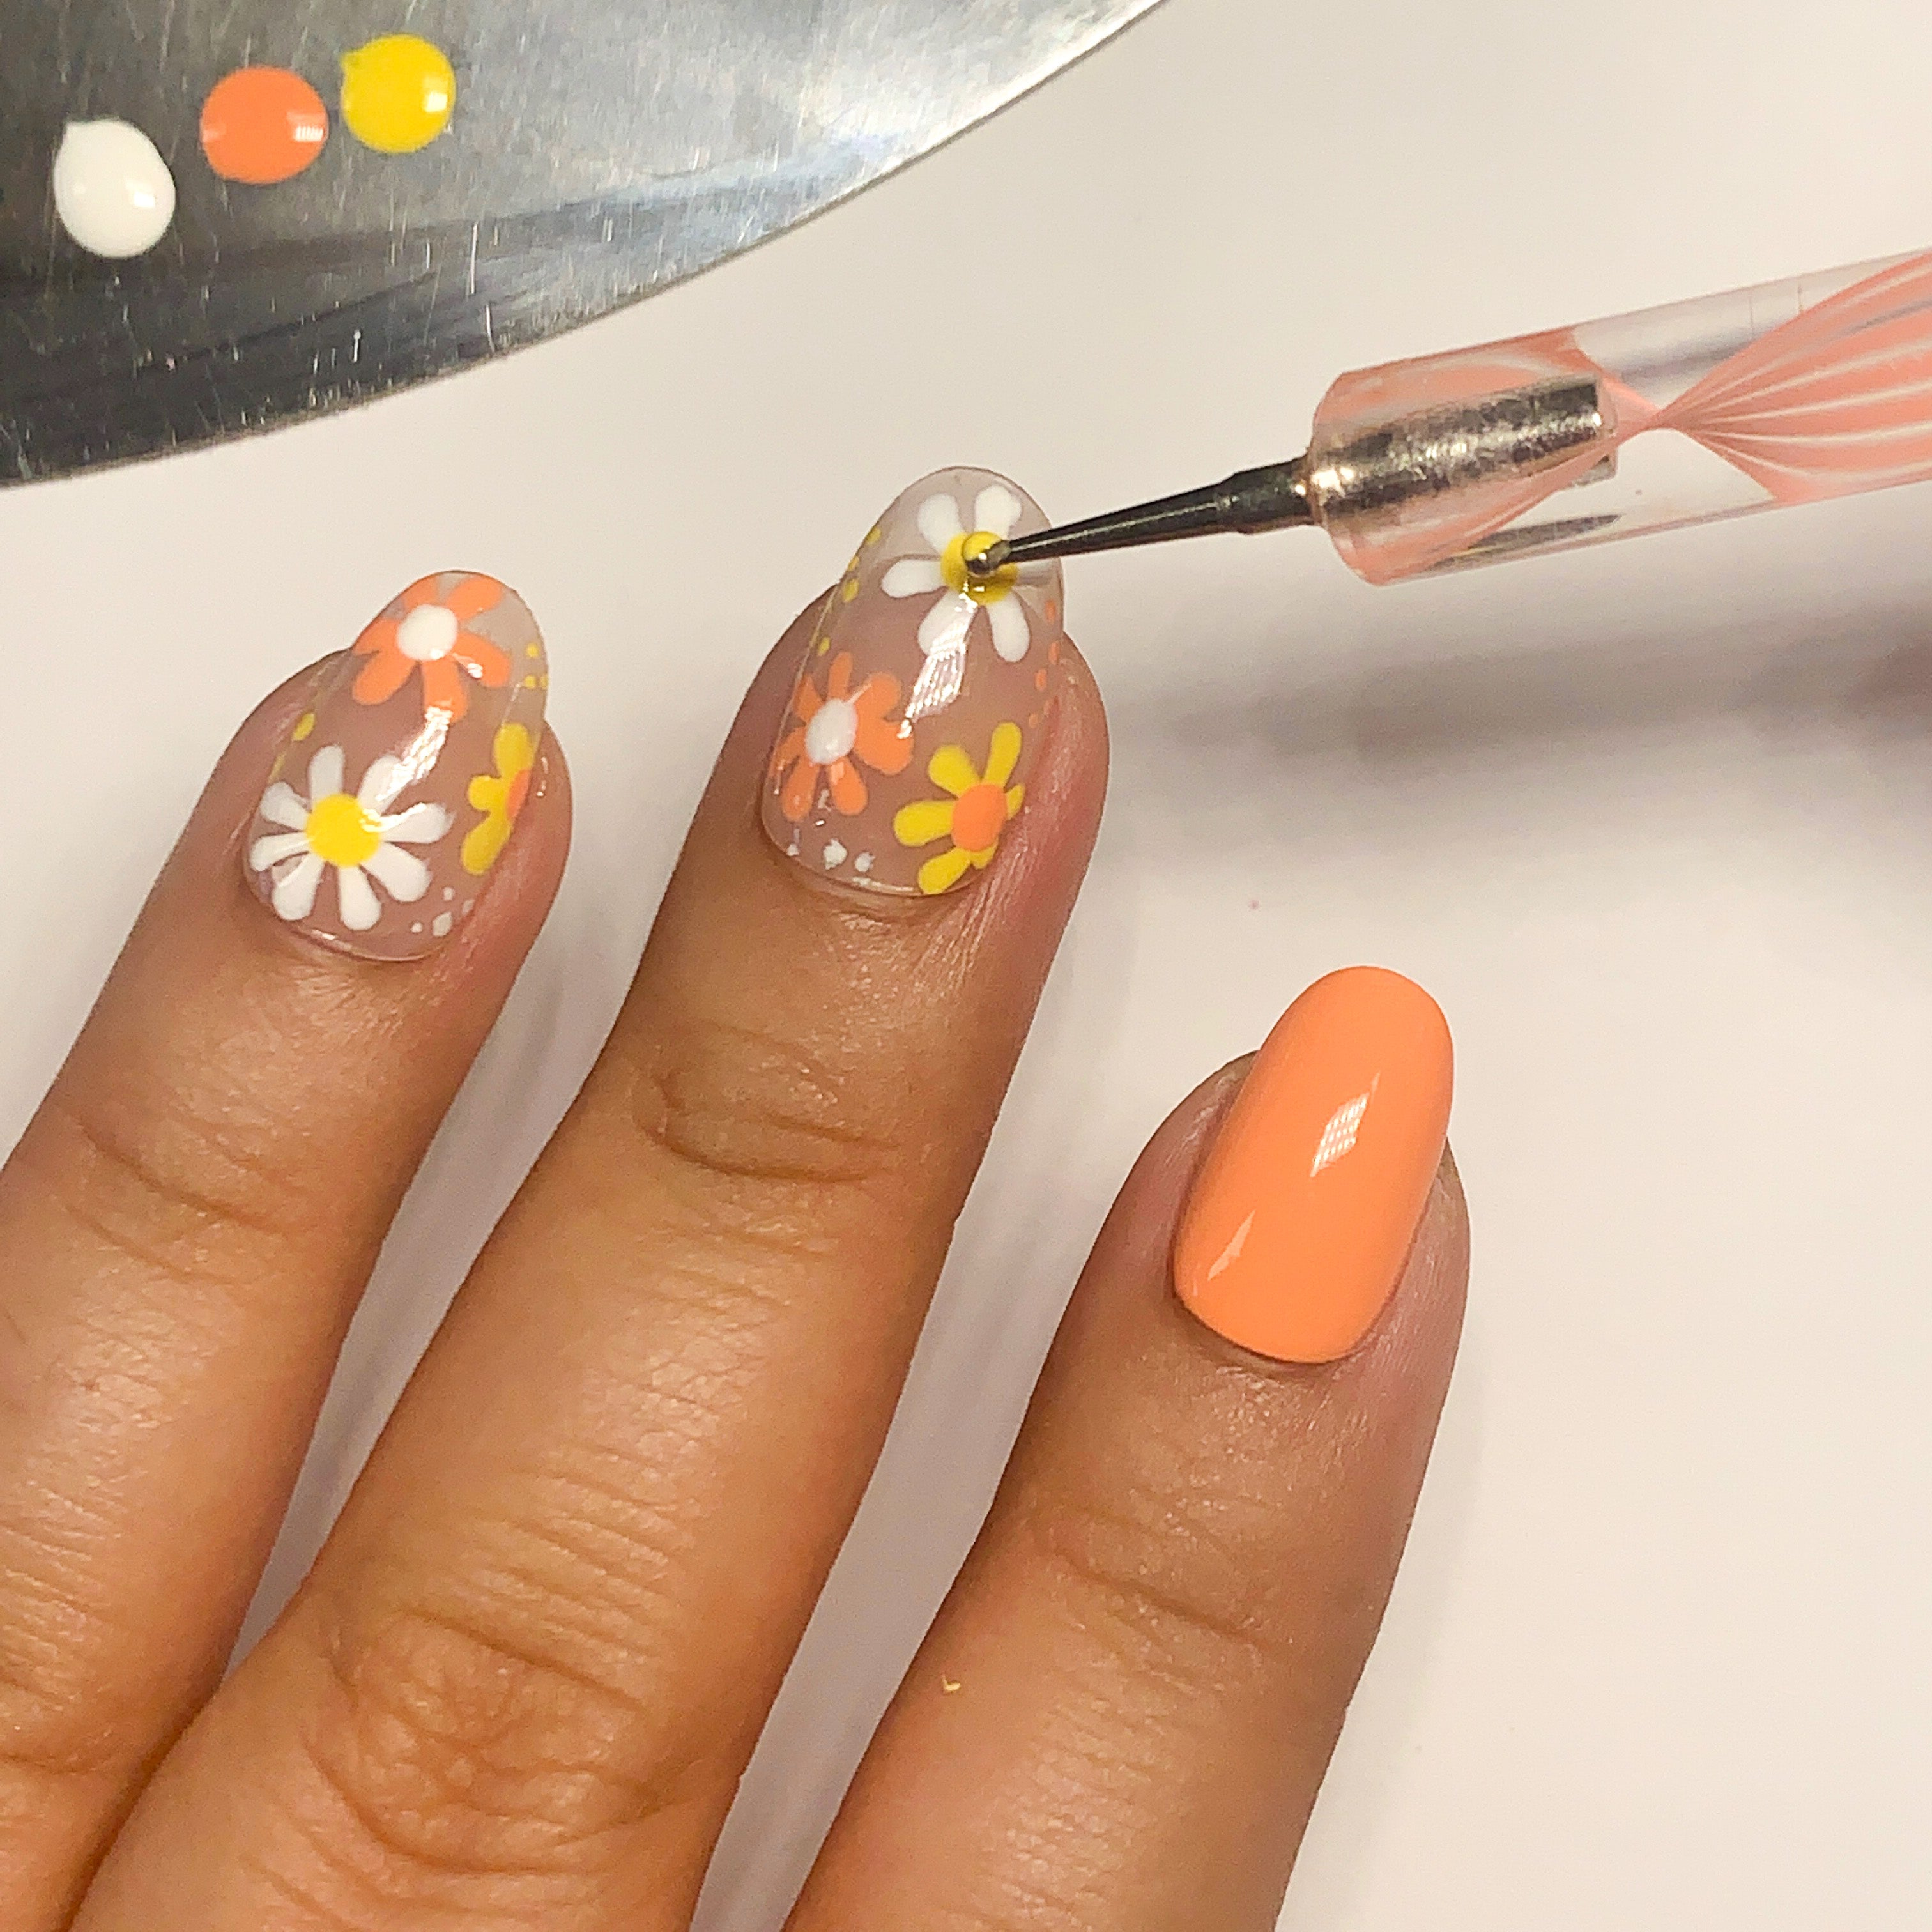 Manic Talons Nail Design: I'm Dreaming of Sun, Sand and Something Tropical!